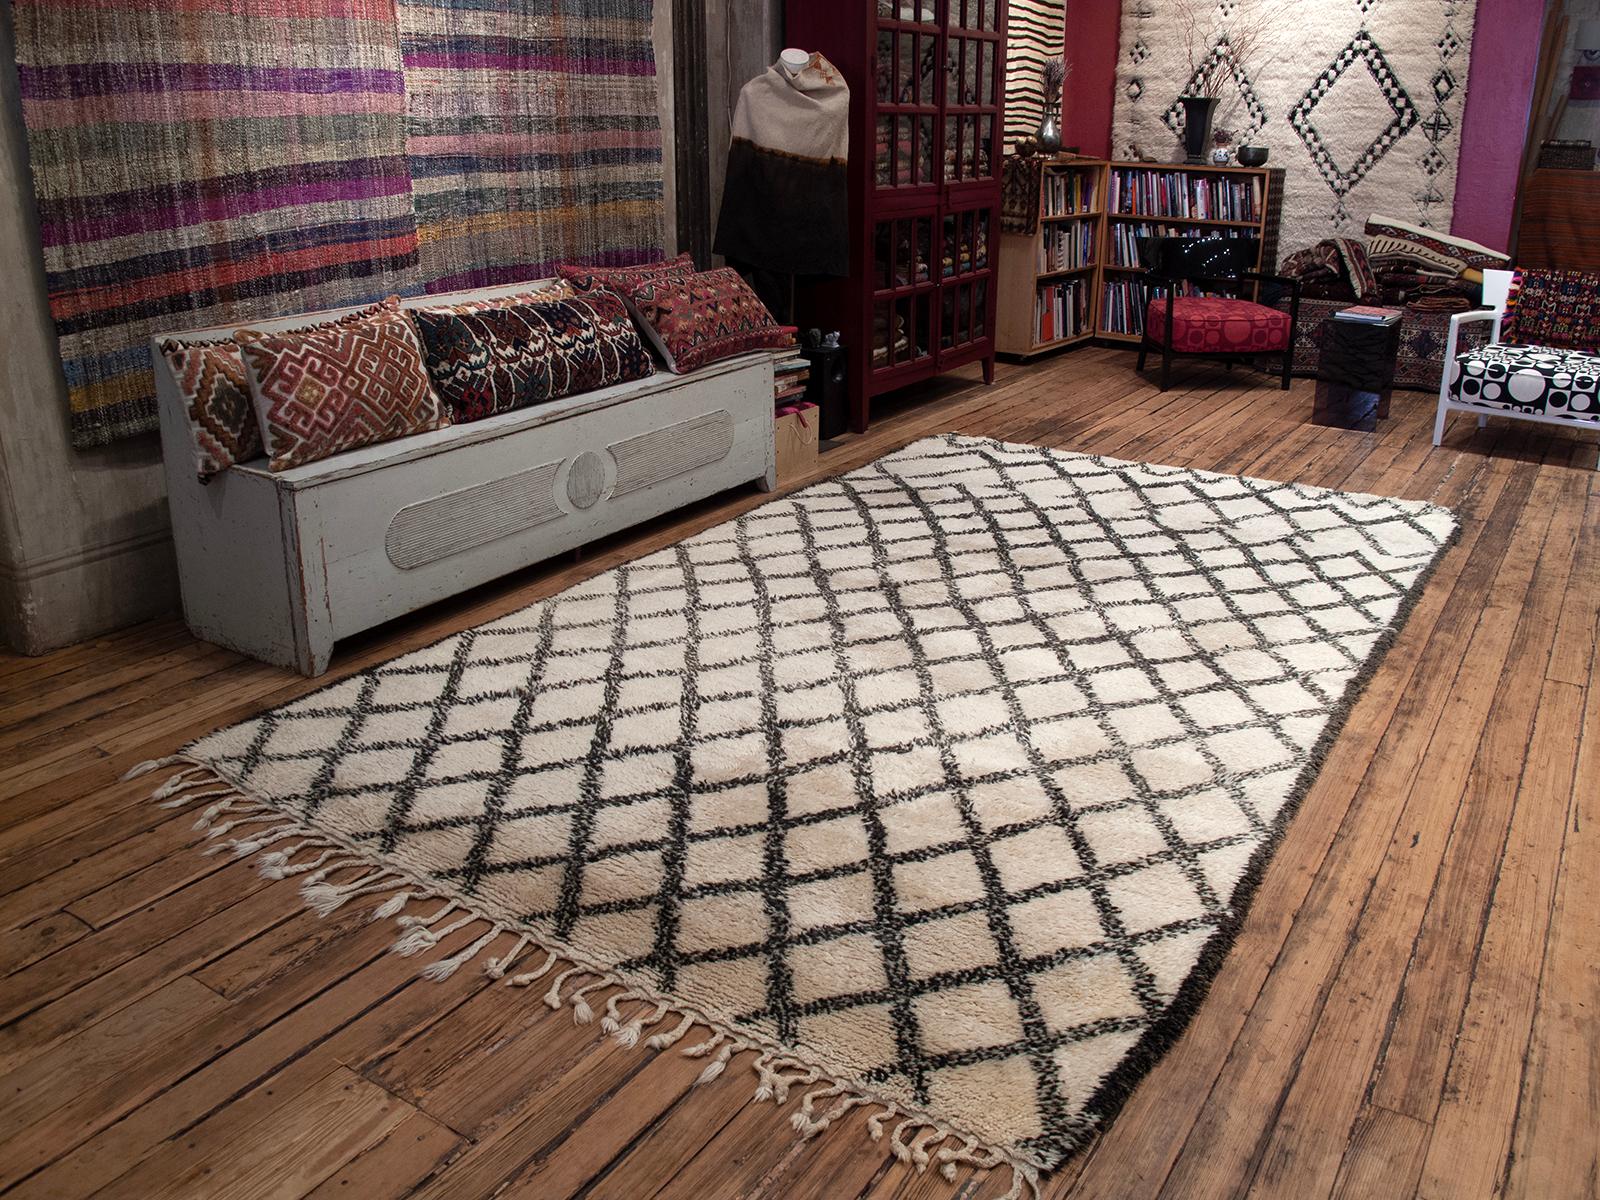 A classic Beni Ouarain tribal carpet from the Northeastern Middle Atlas Mountains, with the typical diamond grid pattern in small scale - note the pattern change at the bottom, which is where the weaver started, showing a bit of a struggle to decide